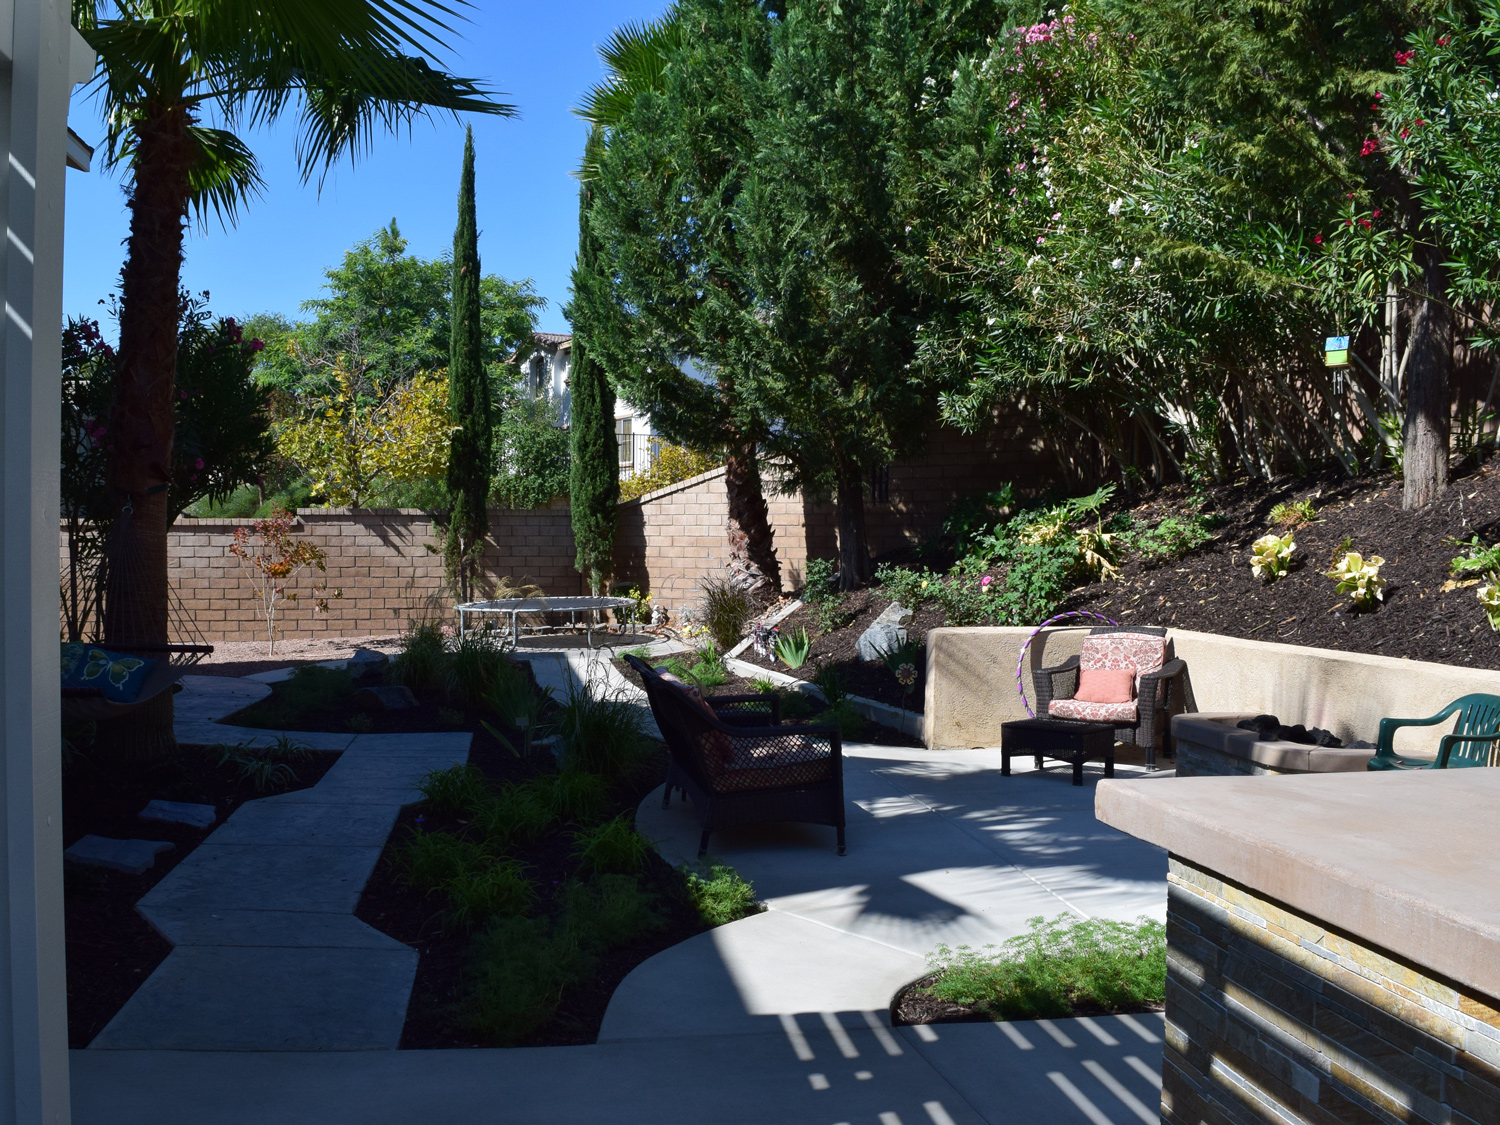 Retaining wall and patio space in Temecula McCabe's Landscape Construction